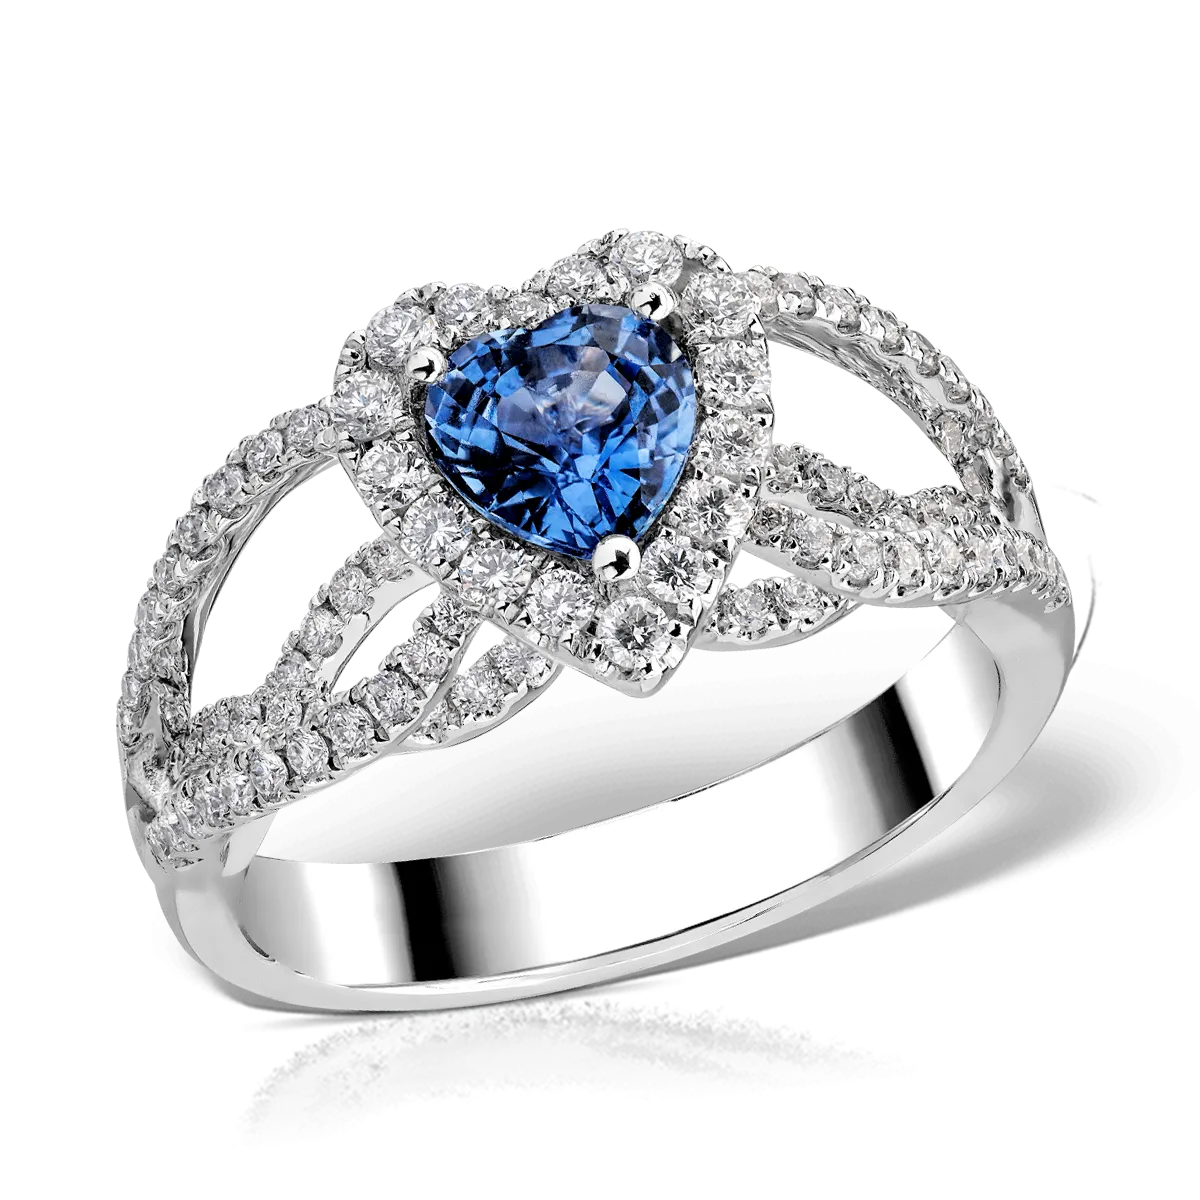 18K white gold engagement ring with 1.38ct fancy sapphire and 0.69ct diamond